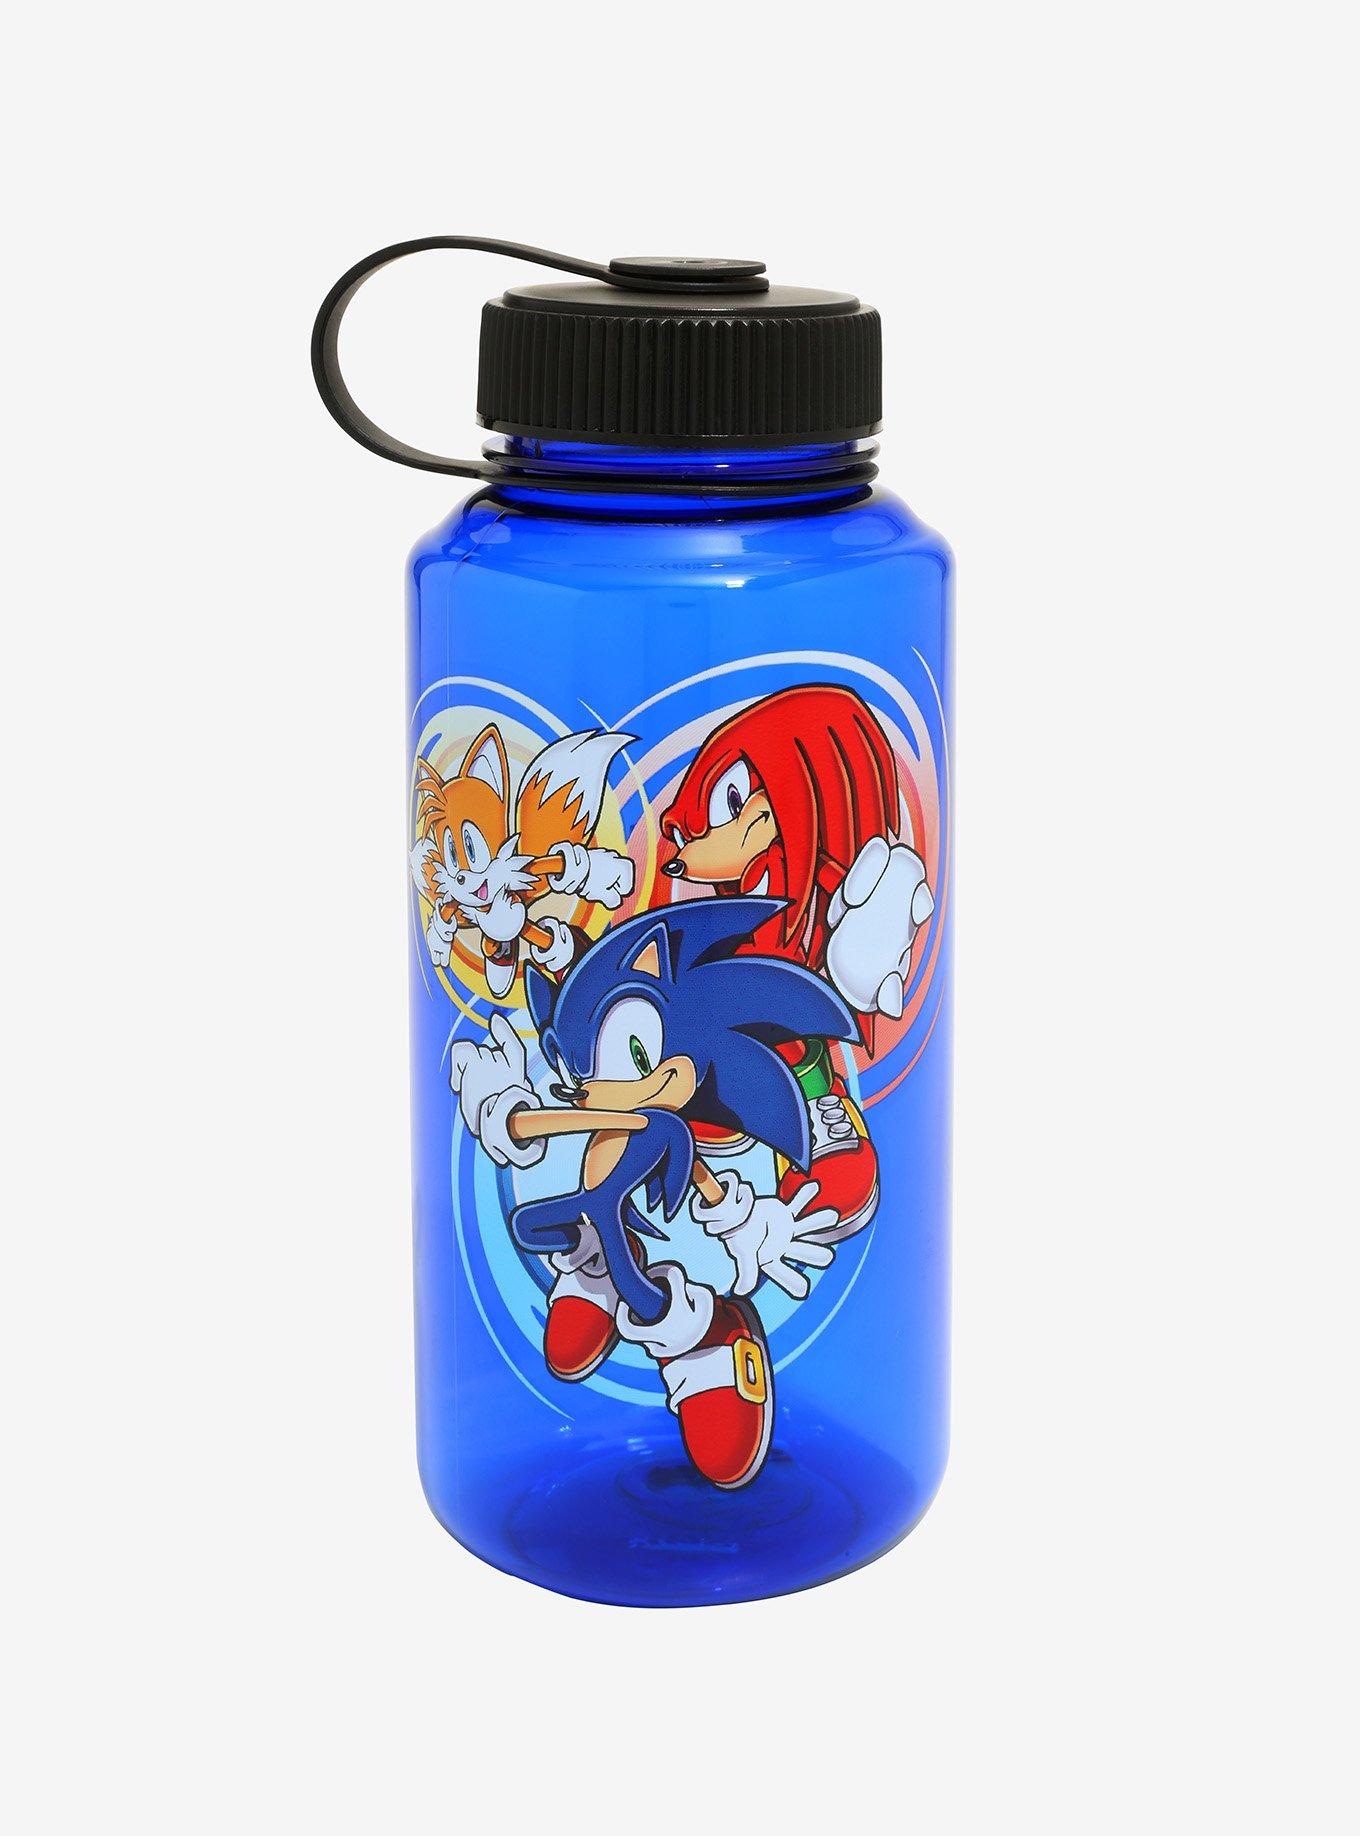 Sonic the Hedgehog and Rings Plastic Water Bottle